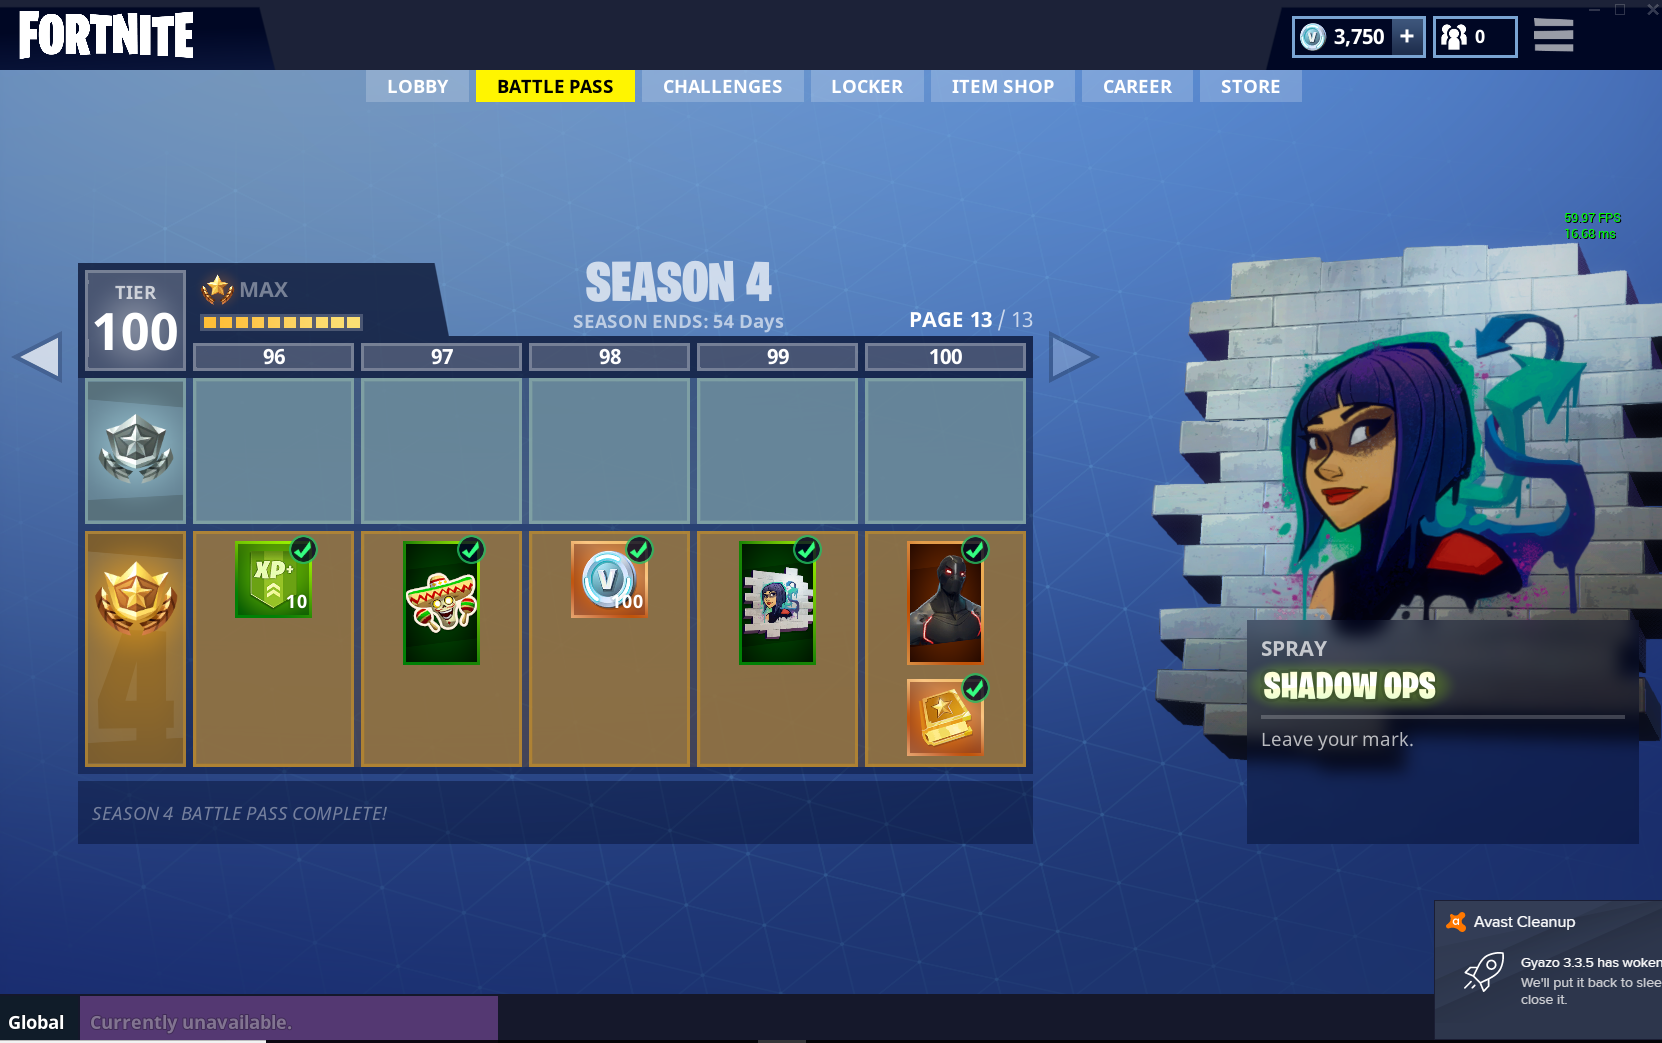 Selling - Battle Pass - 0-5 Wins - PC - Fortnite Account ... - 1662 x 1043 png 1021kB